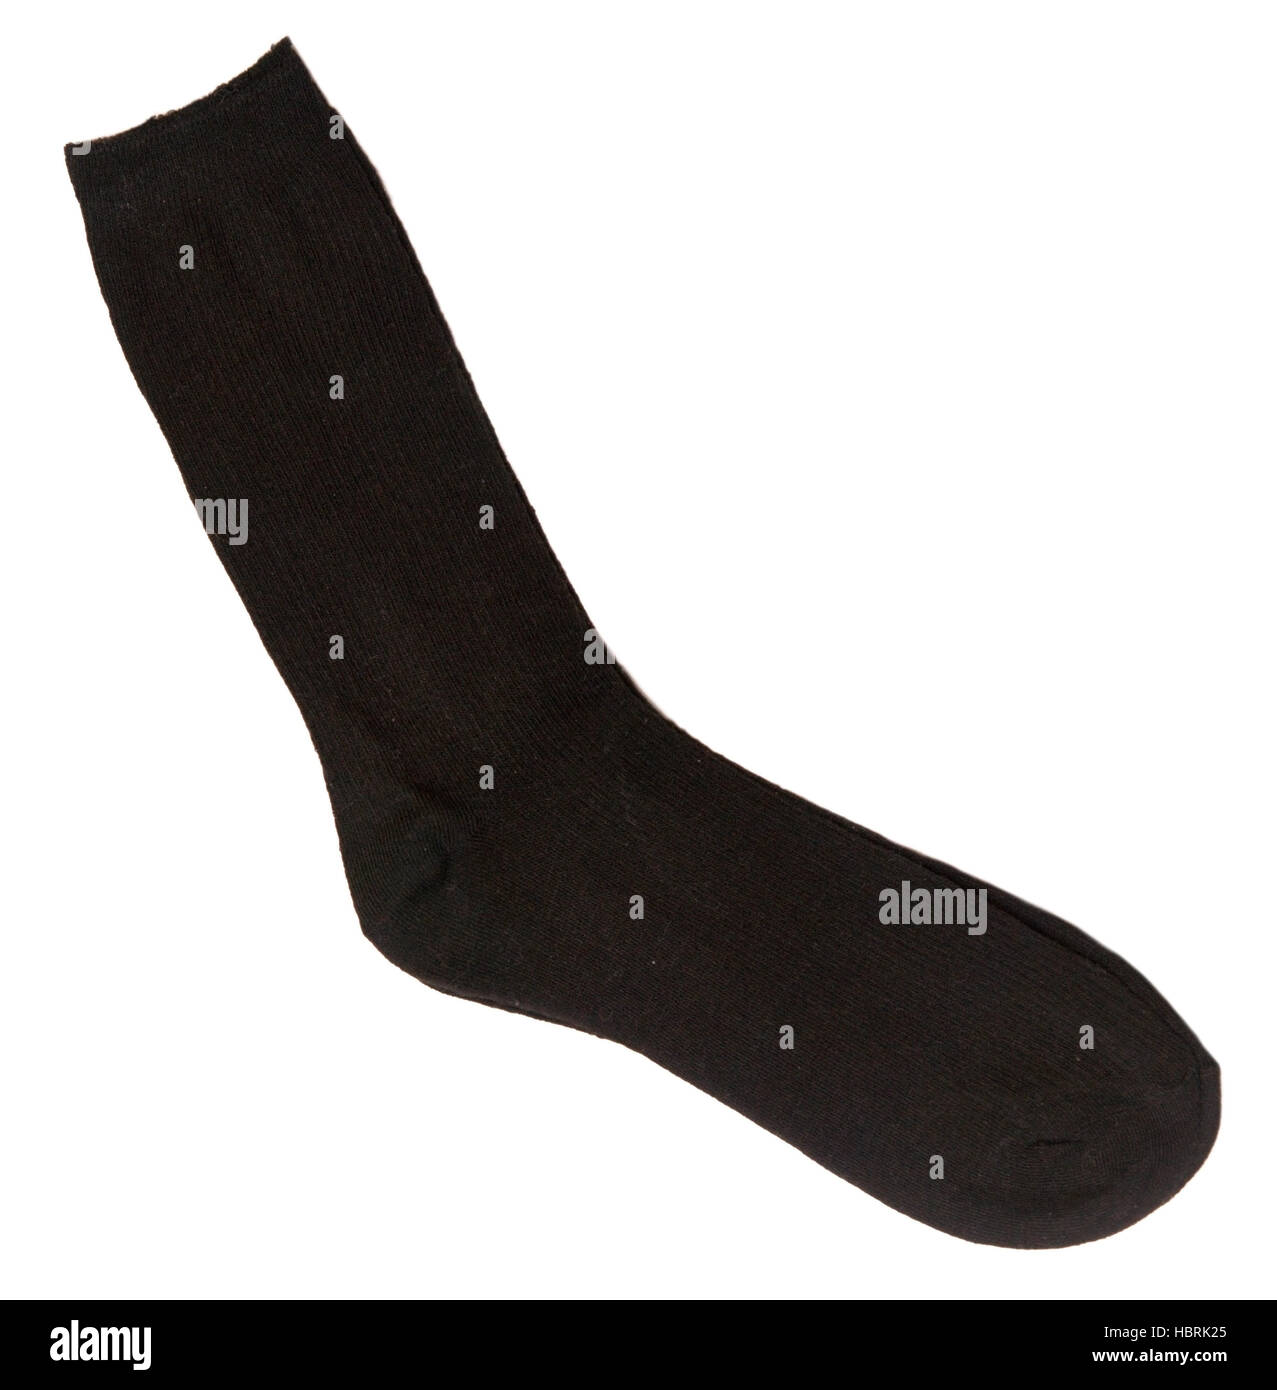 Socks for men Cut Out Stock Images & Pictures - Alamy